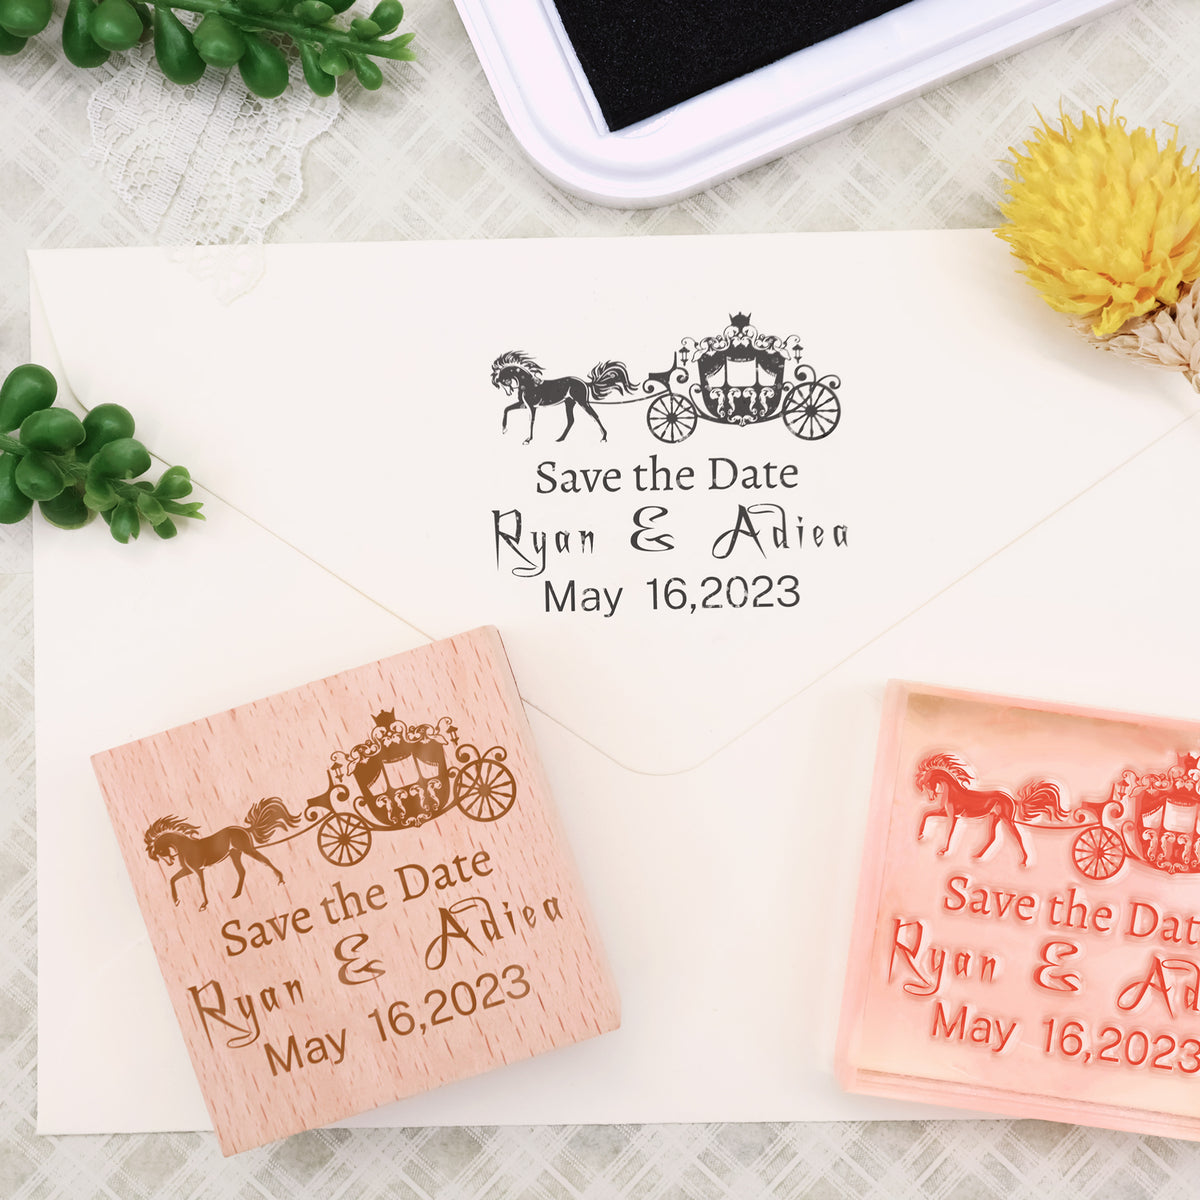 Wedding Personalized Stamp, Save the Date, Rubber Wedding Stamps